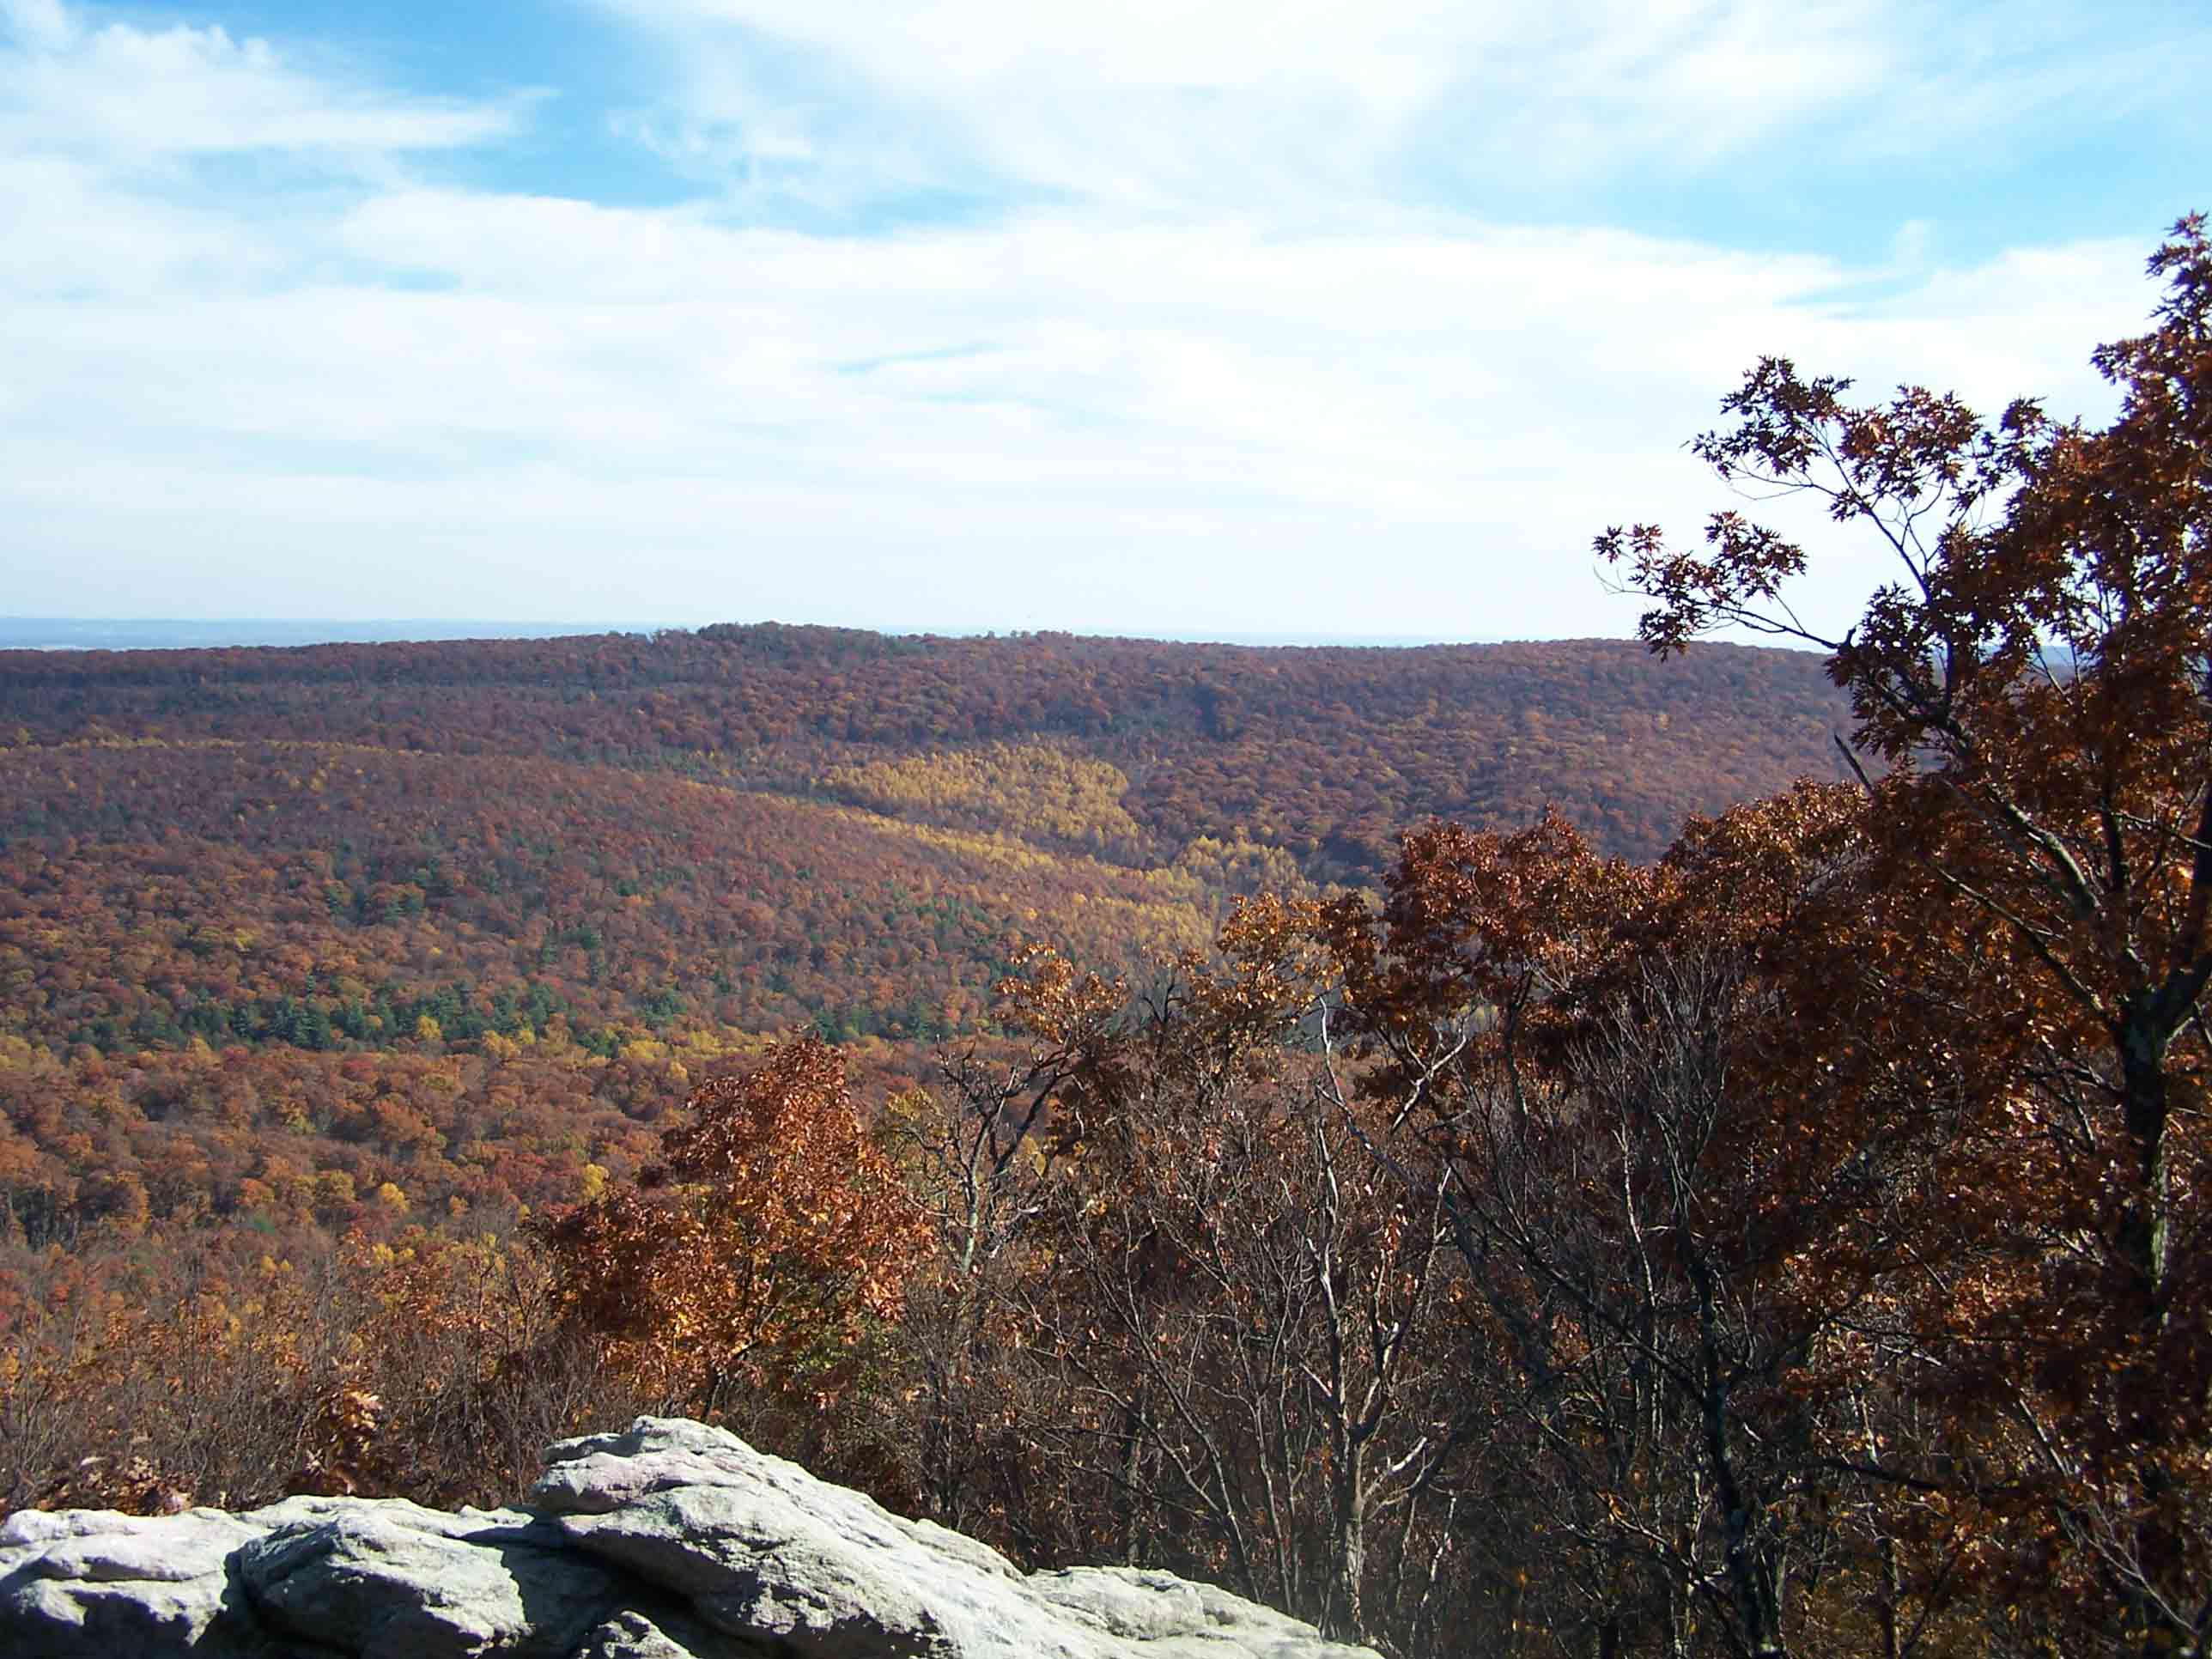 View from Chimney Rocks. Courtesy at@rohland.org